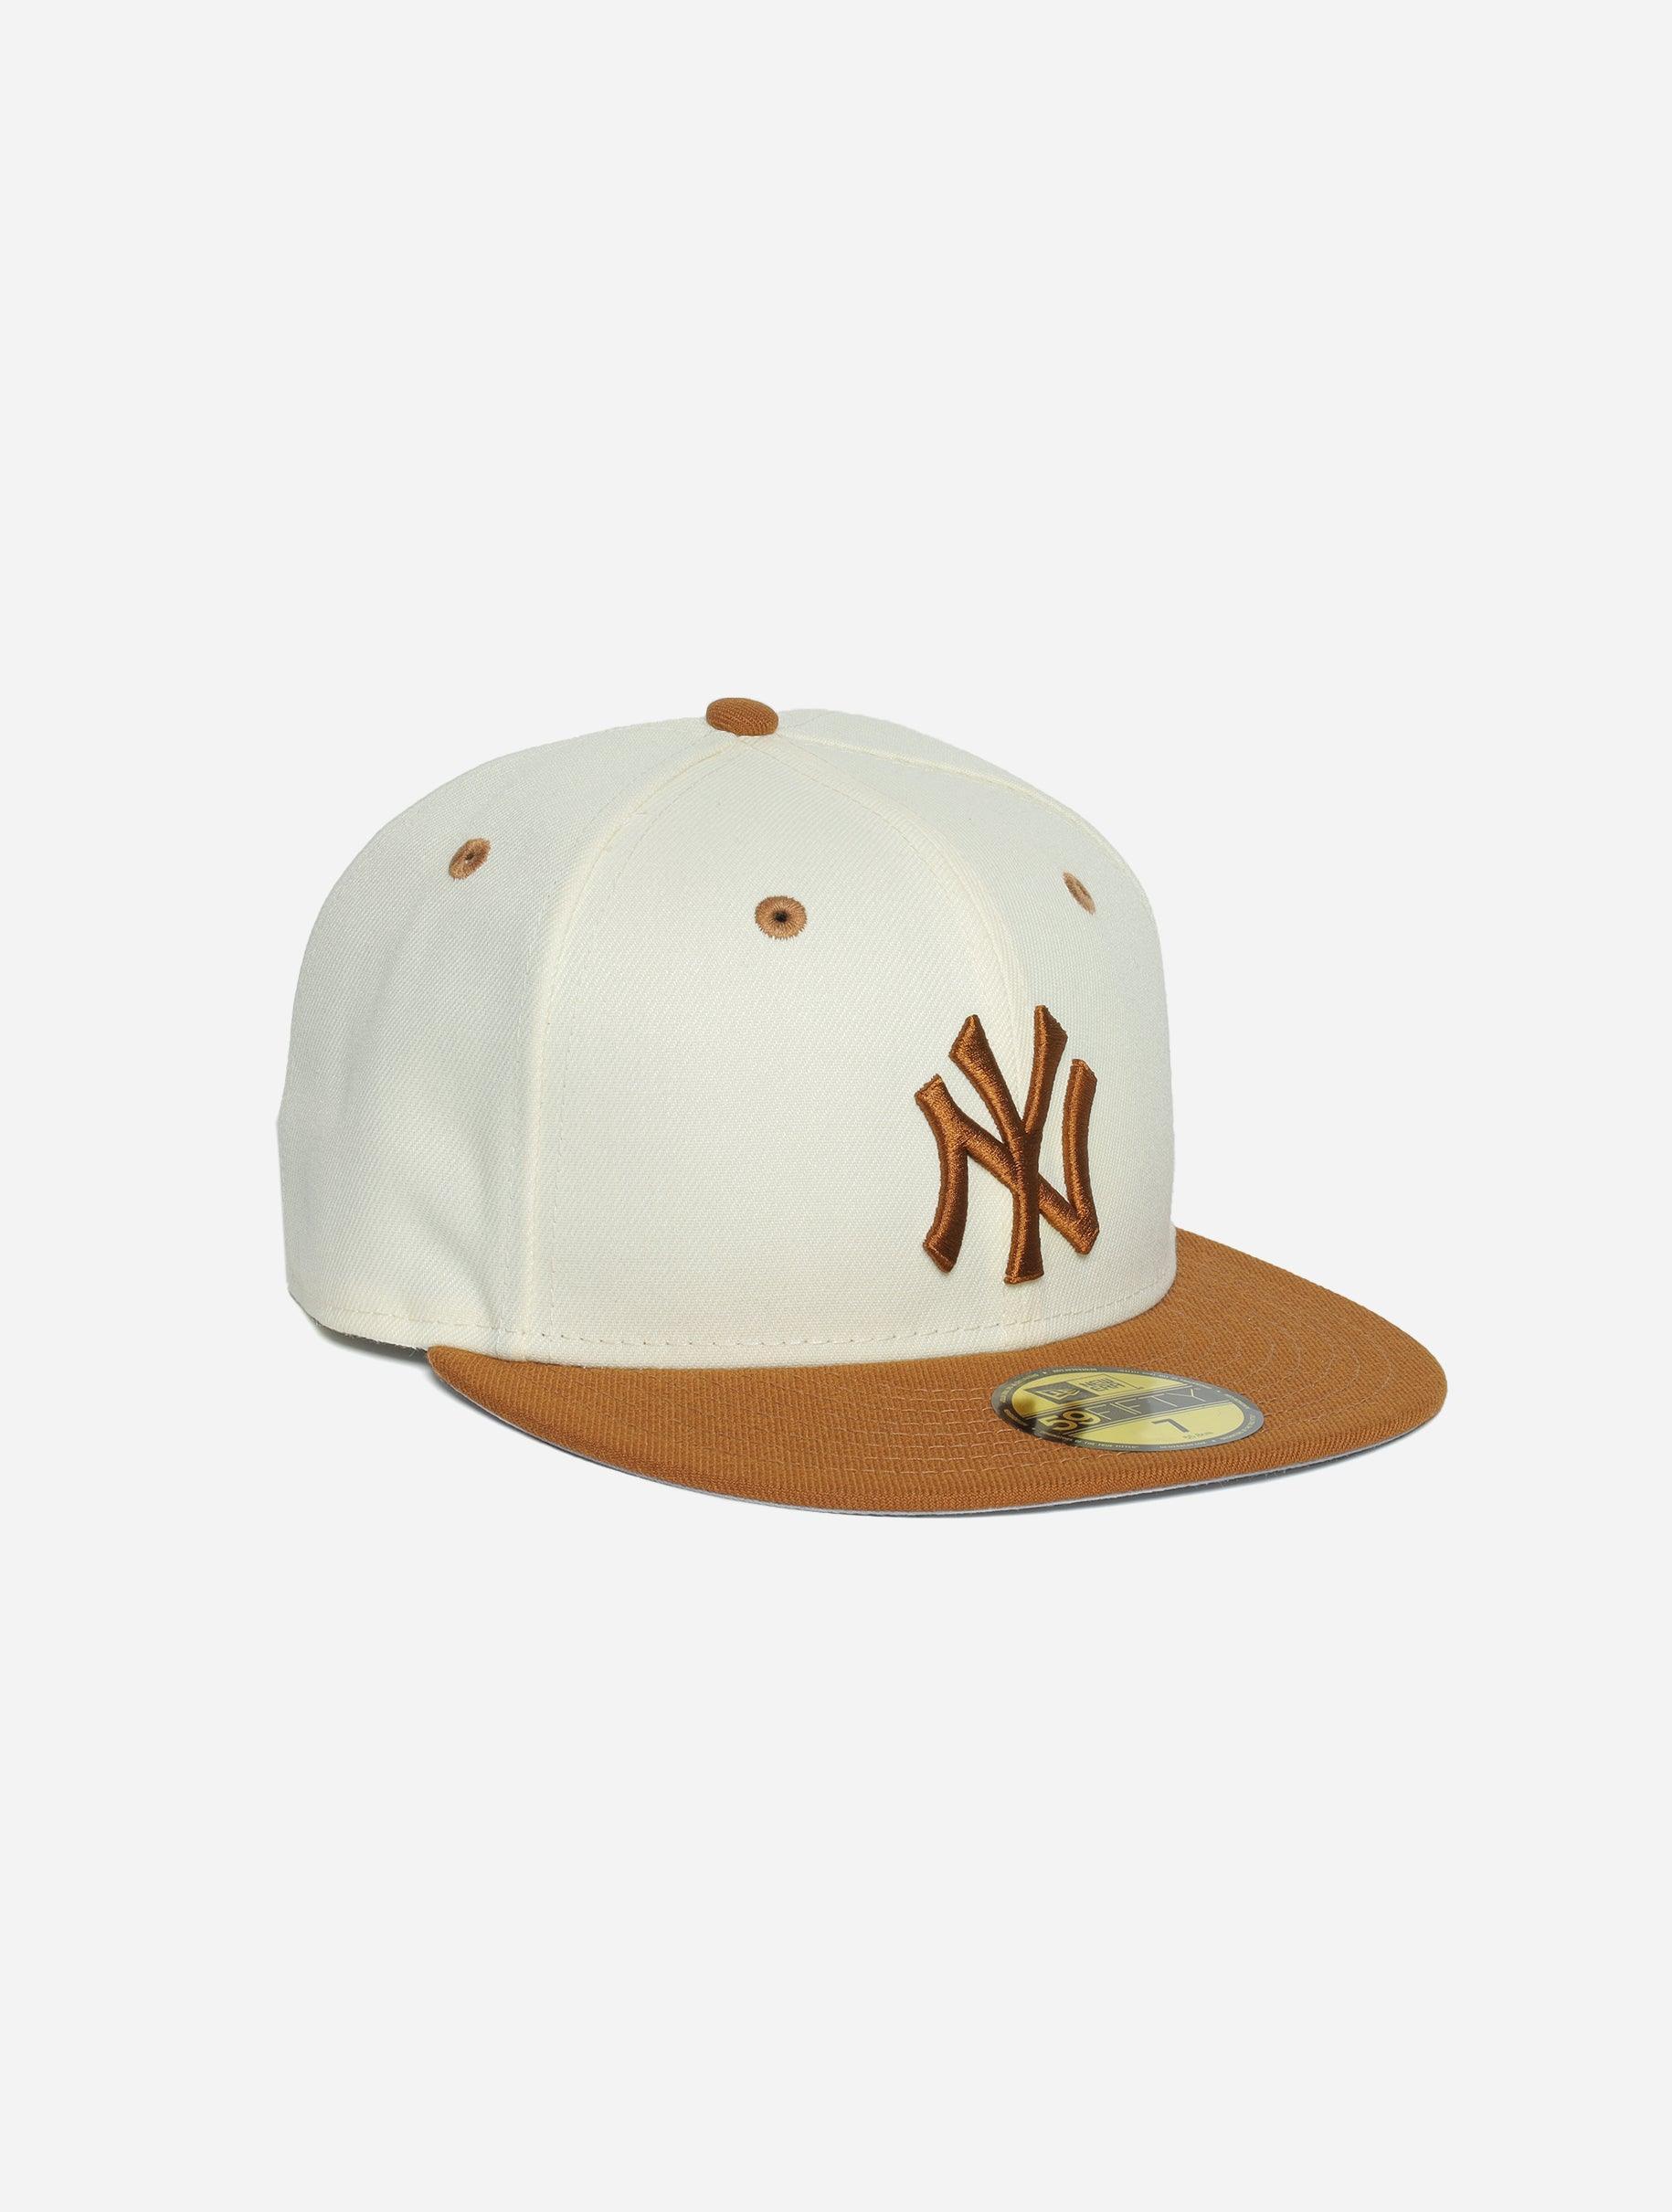 New Era New York Yankees Peanut Butter Toast 59Fifty Fitted - Challenger Streetwear